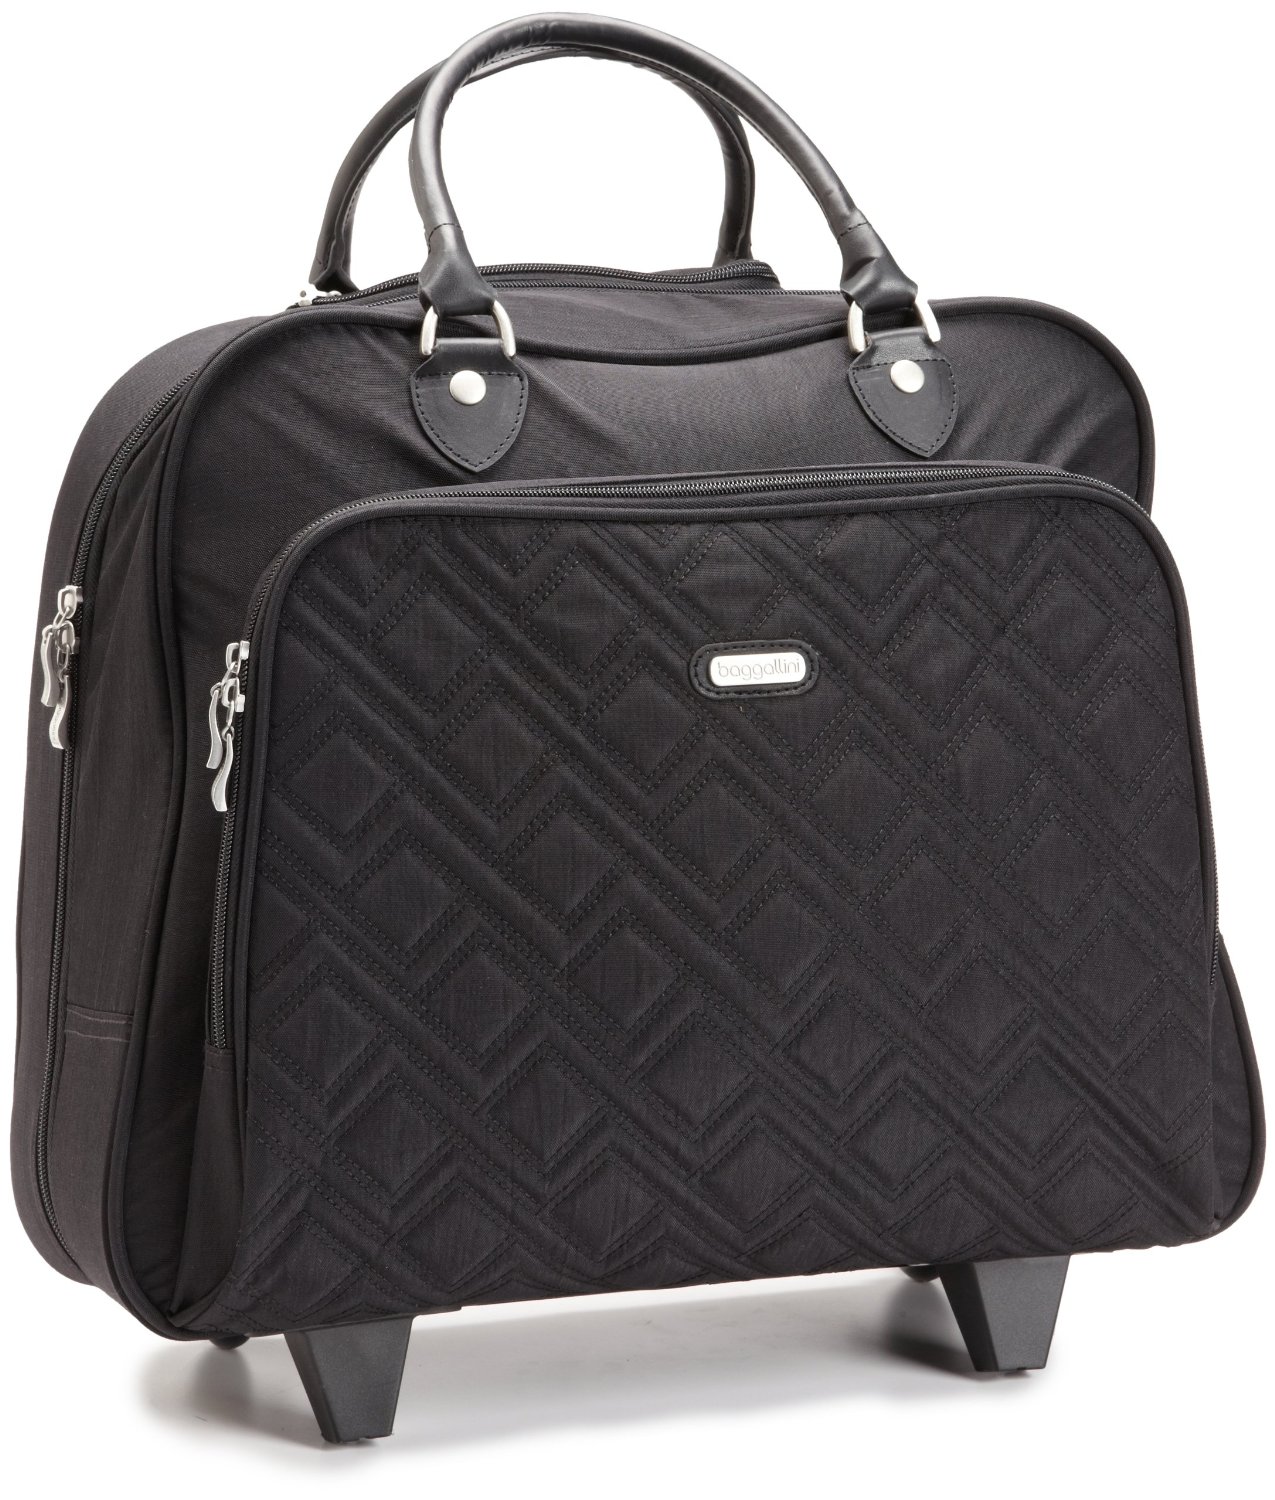 Baggallini Luggage Zig Zag Quilted Rolling Tote Bag Exclusive  $69.99